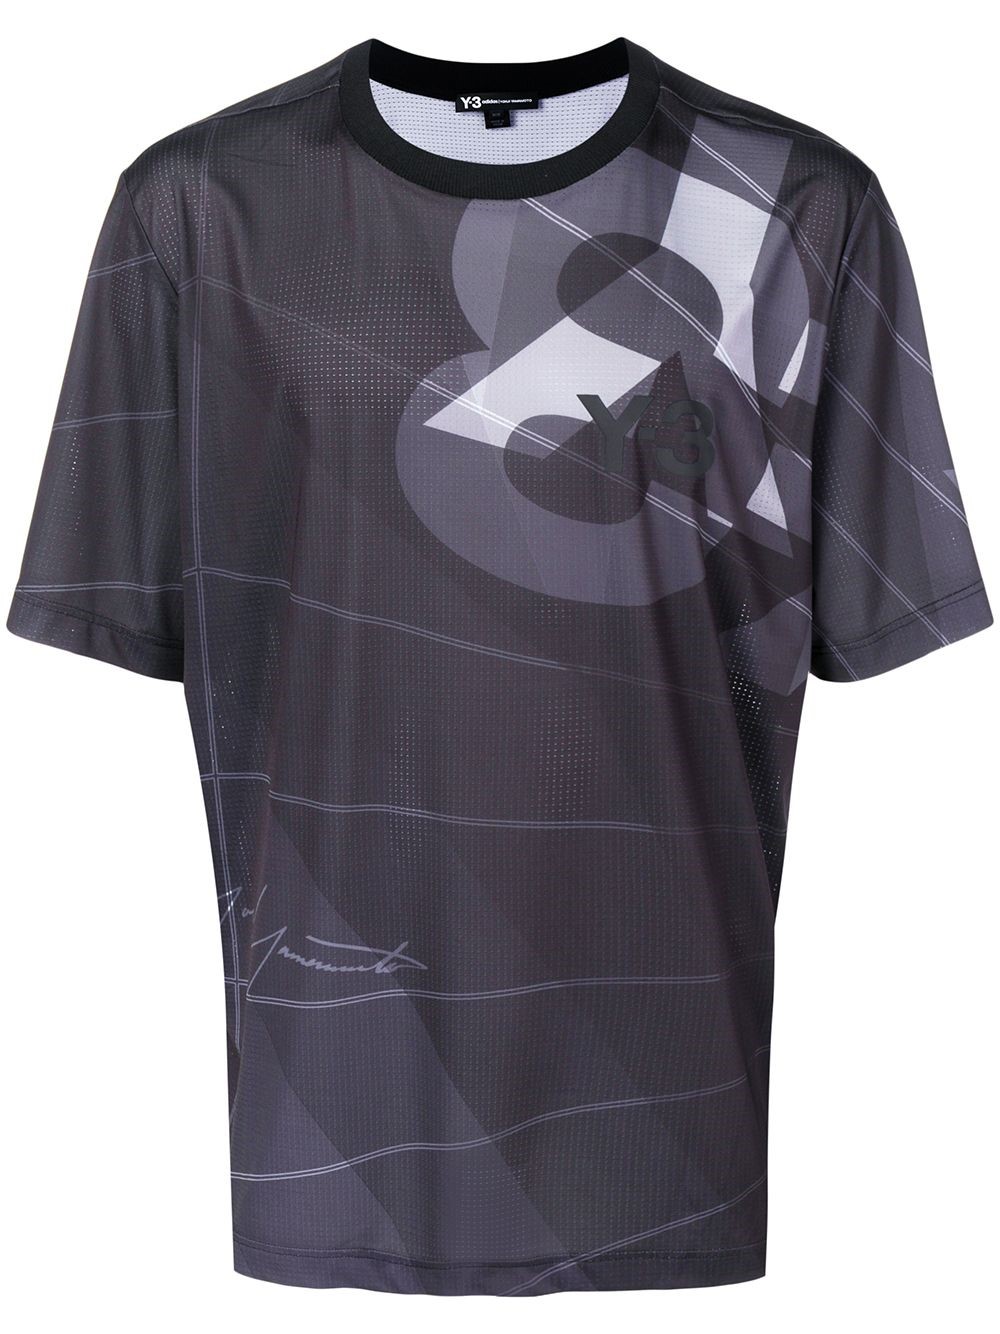 y-3 T-SHIRT available on montiboutique.com - 27514